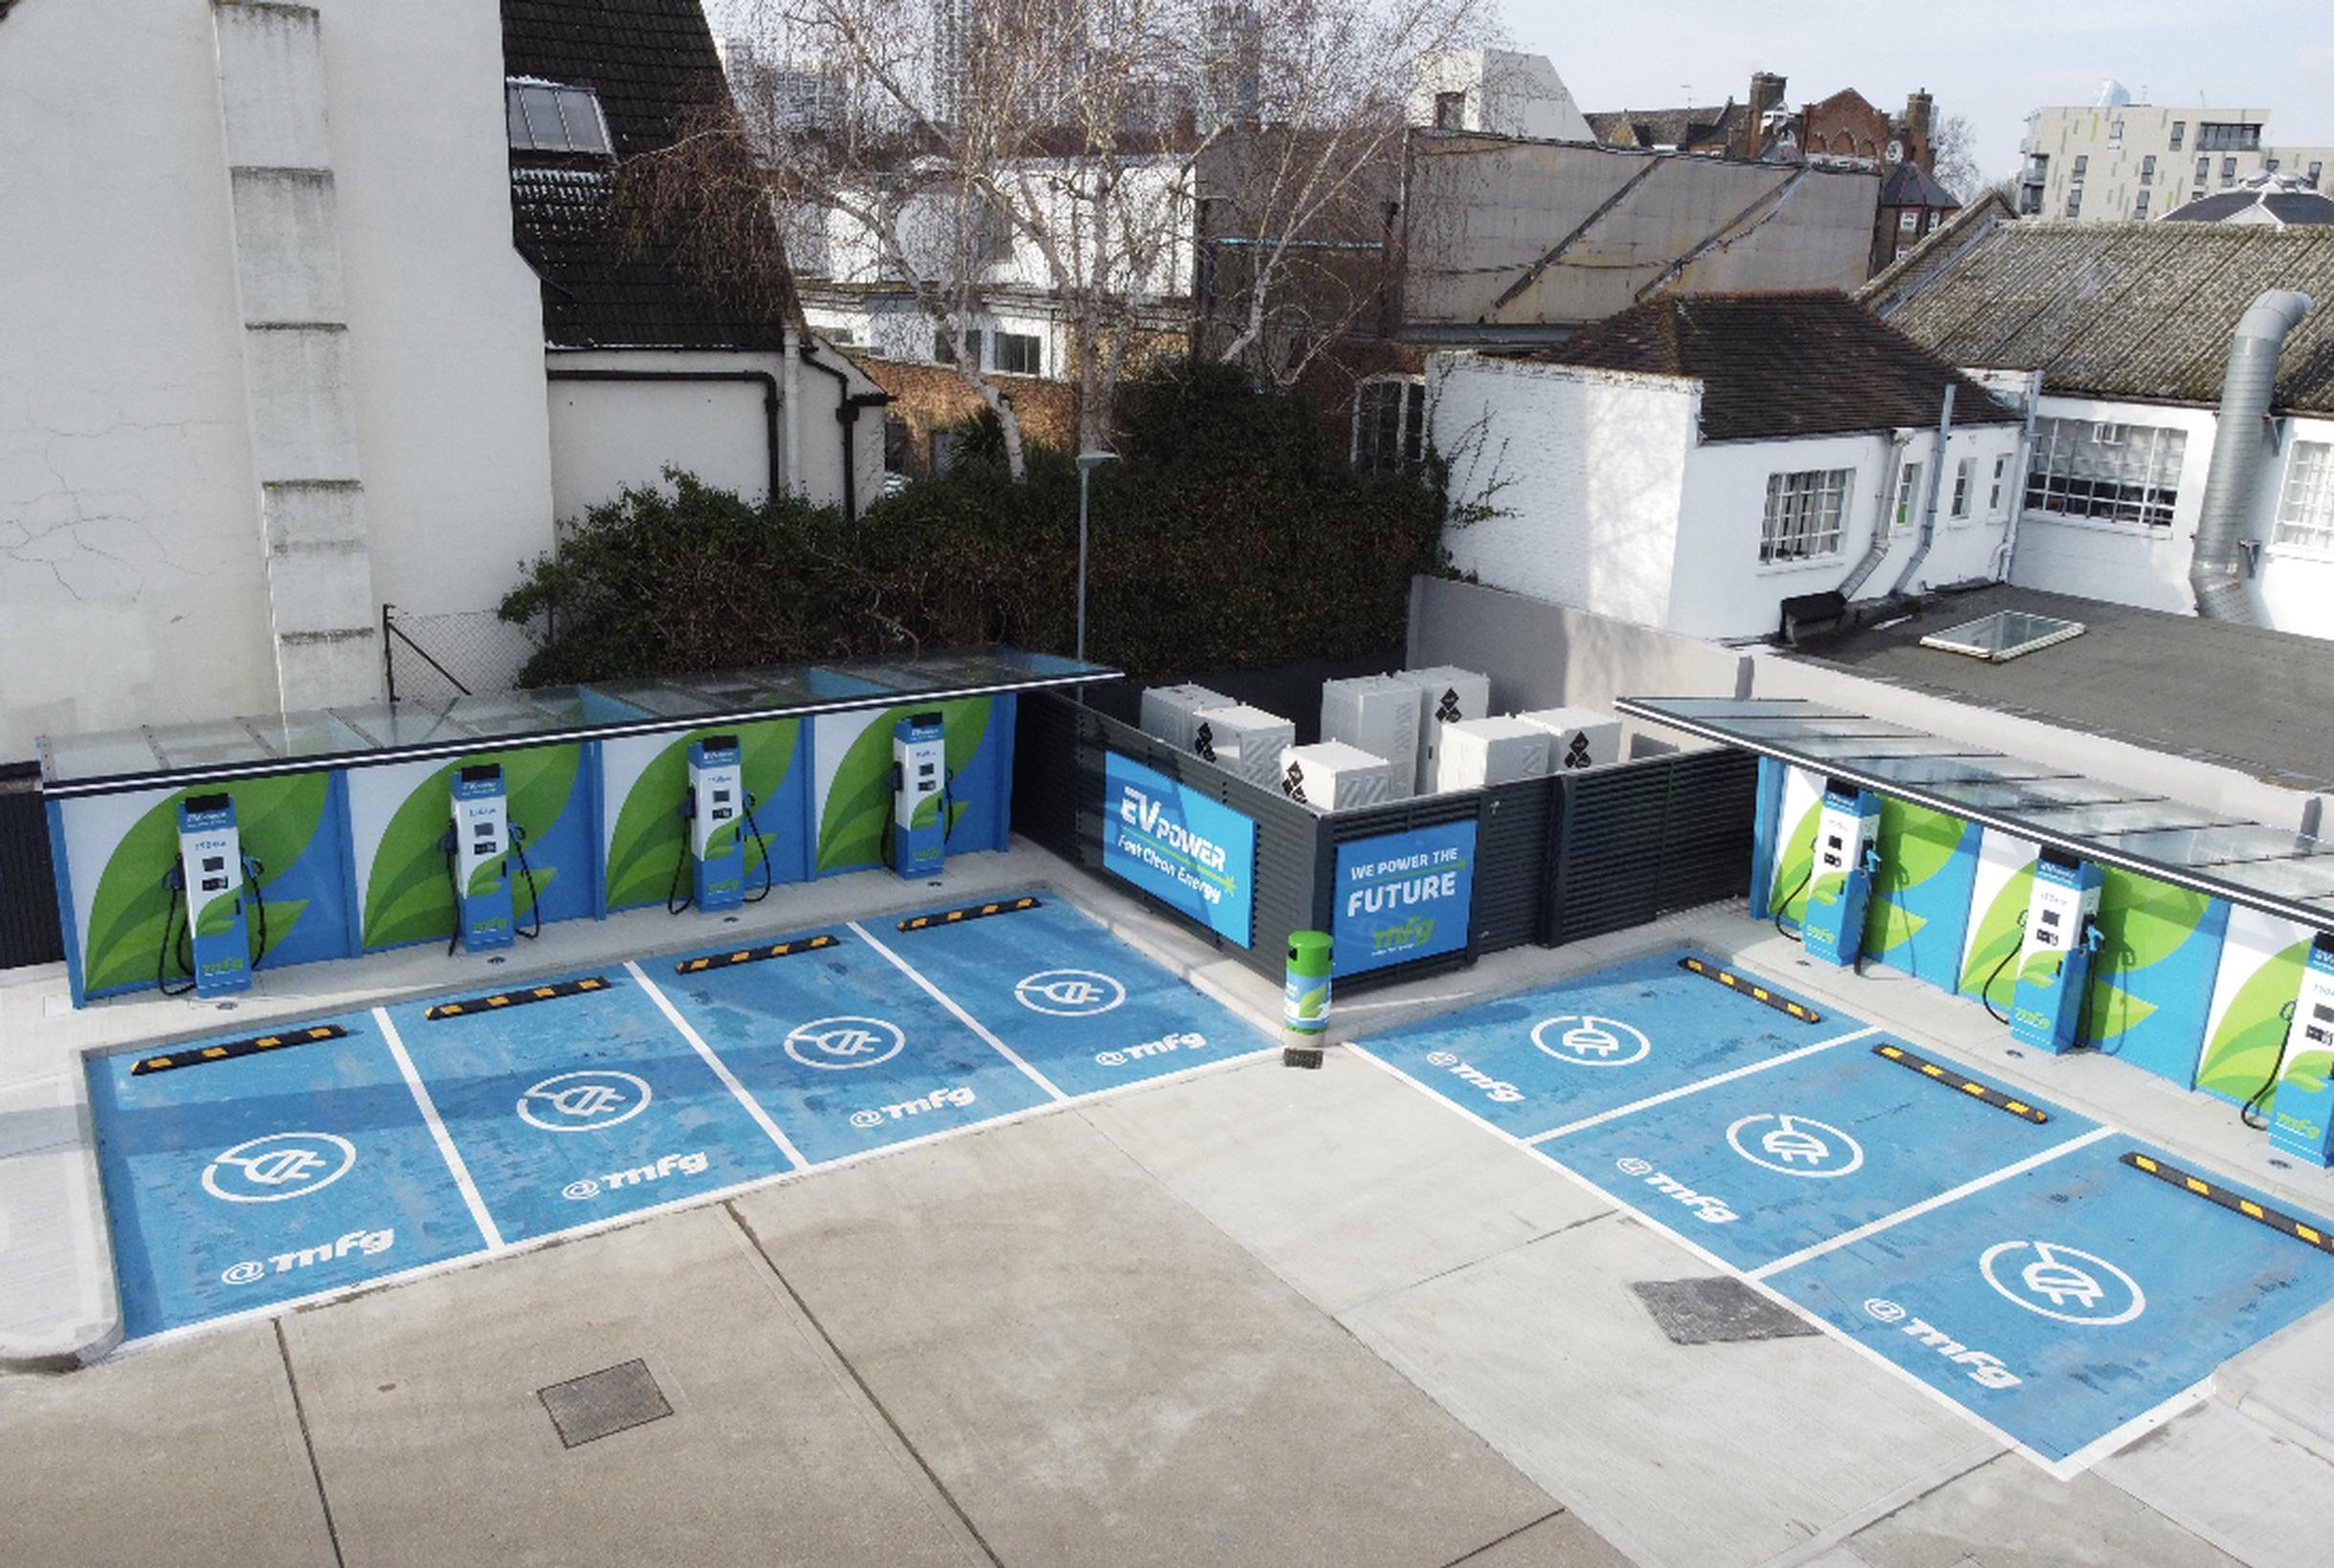 MFG`s current network comprises around 40 rapid and ultra-rapid charging devices at service stations across the UK